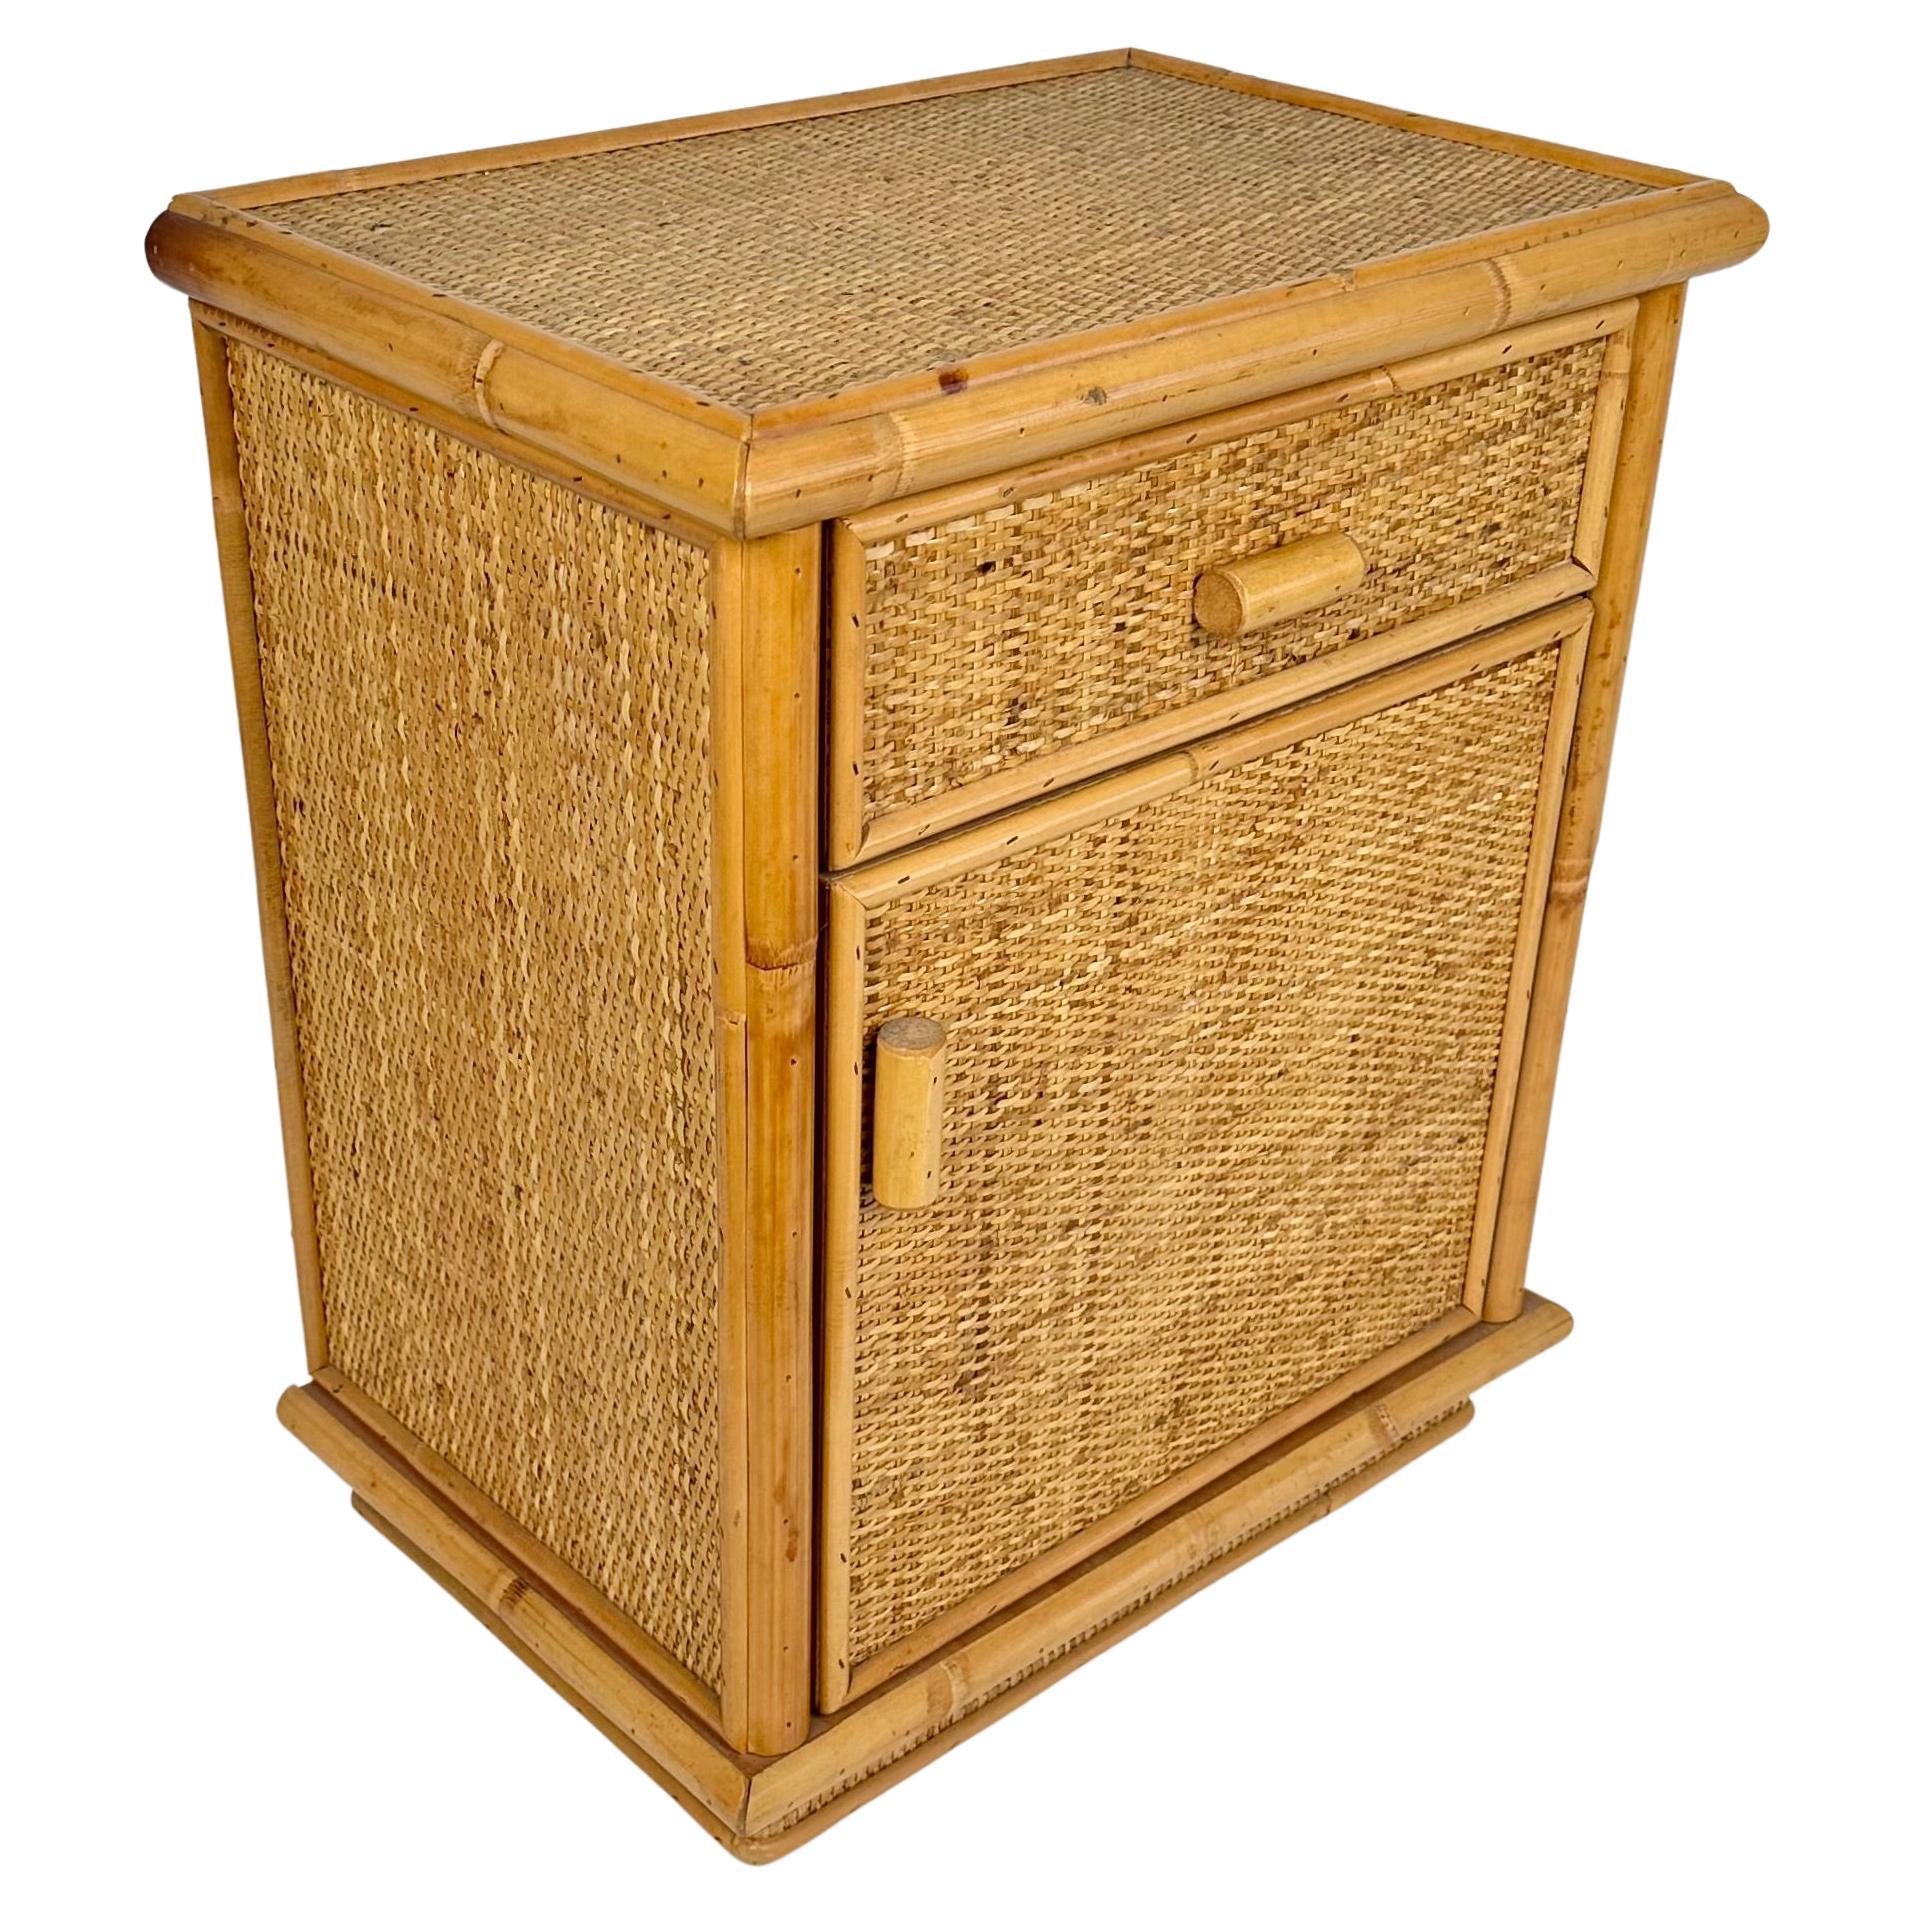 Midcentury Pair of Bed Side Tables Nightstands in Bamboo & Rattan, Italy, 1970s For Sale 5